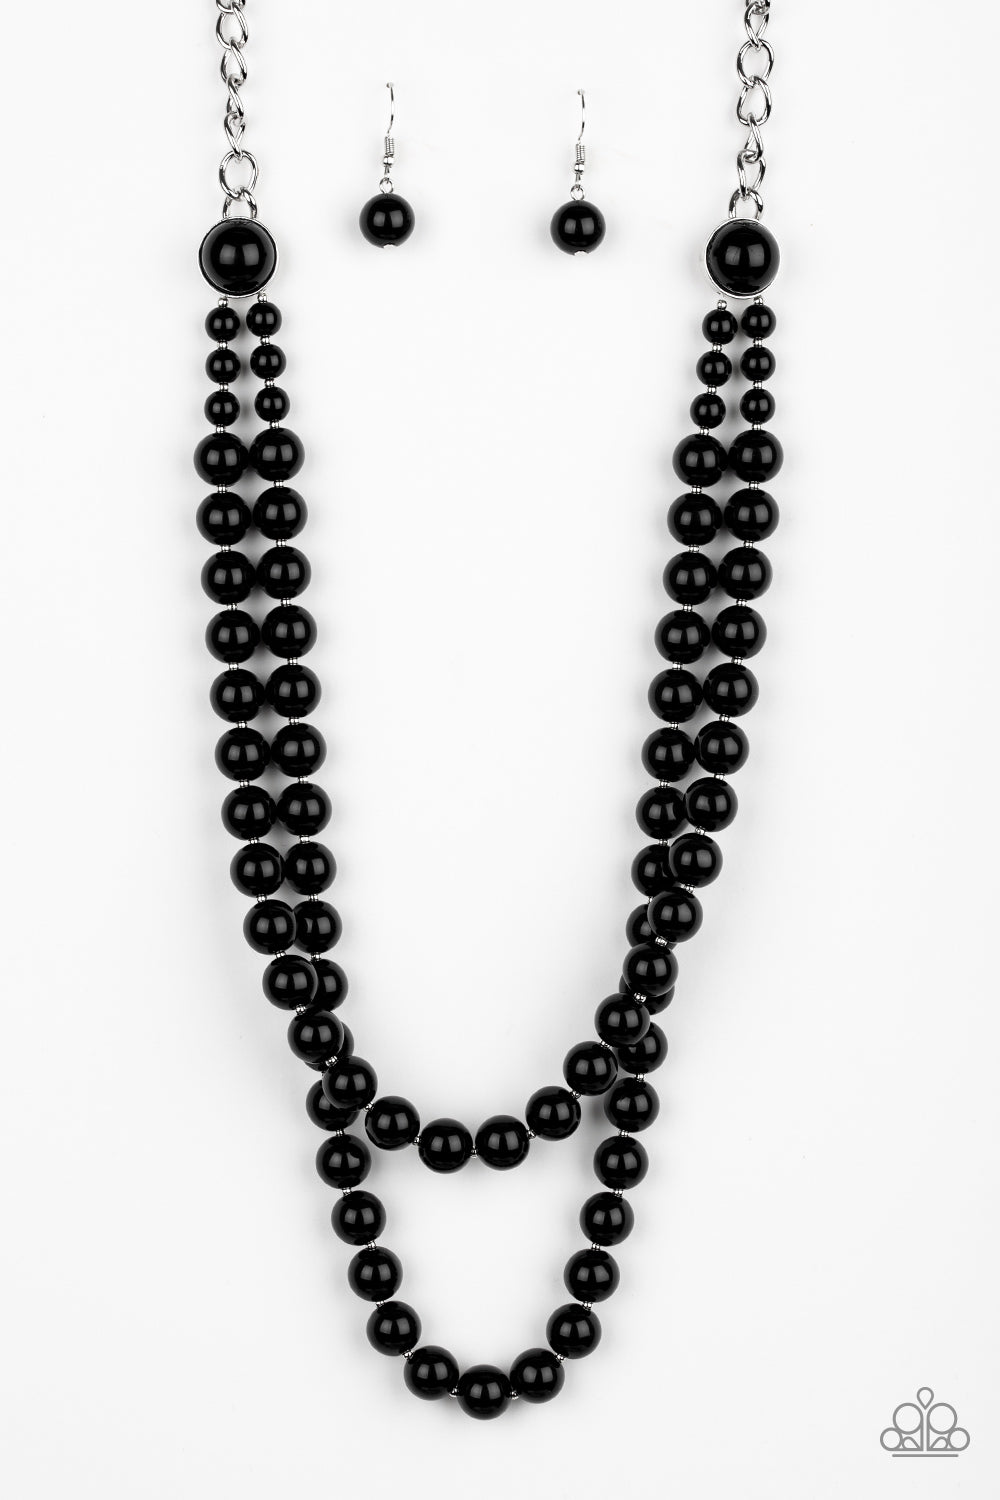 five-dollar-jewelry-endless-elegance-black-necklace-paparazzi-accessories